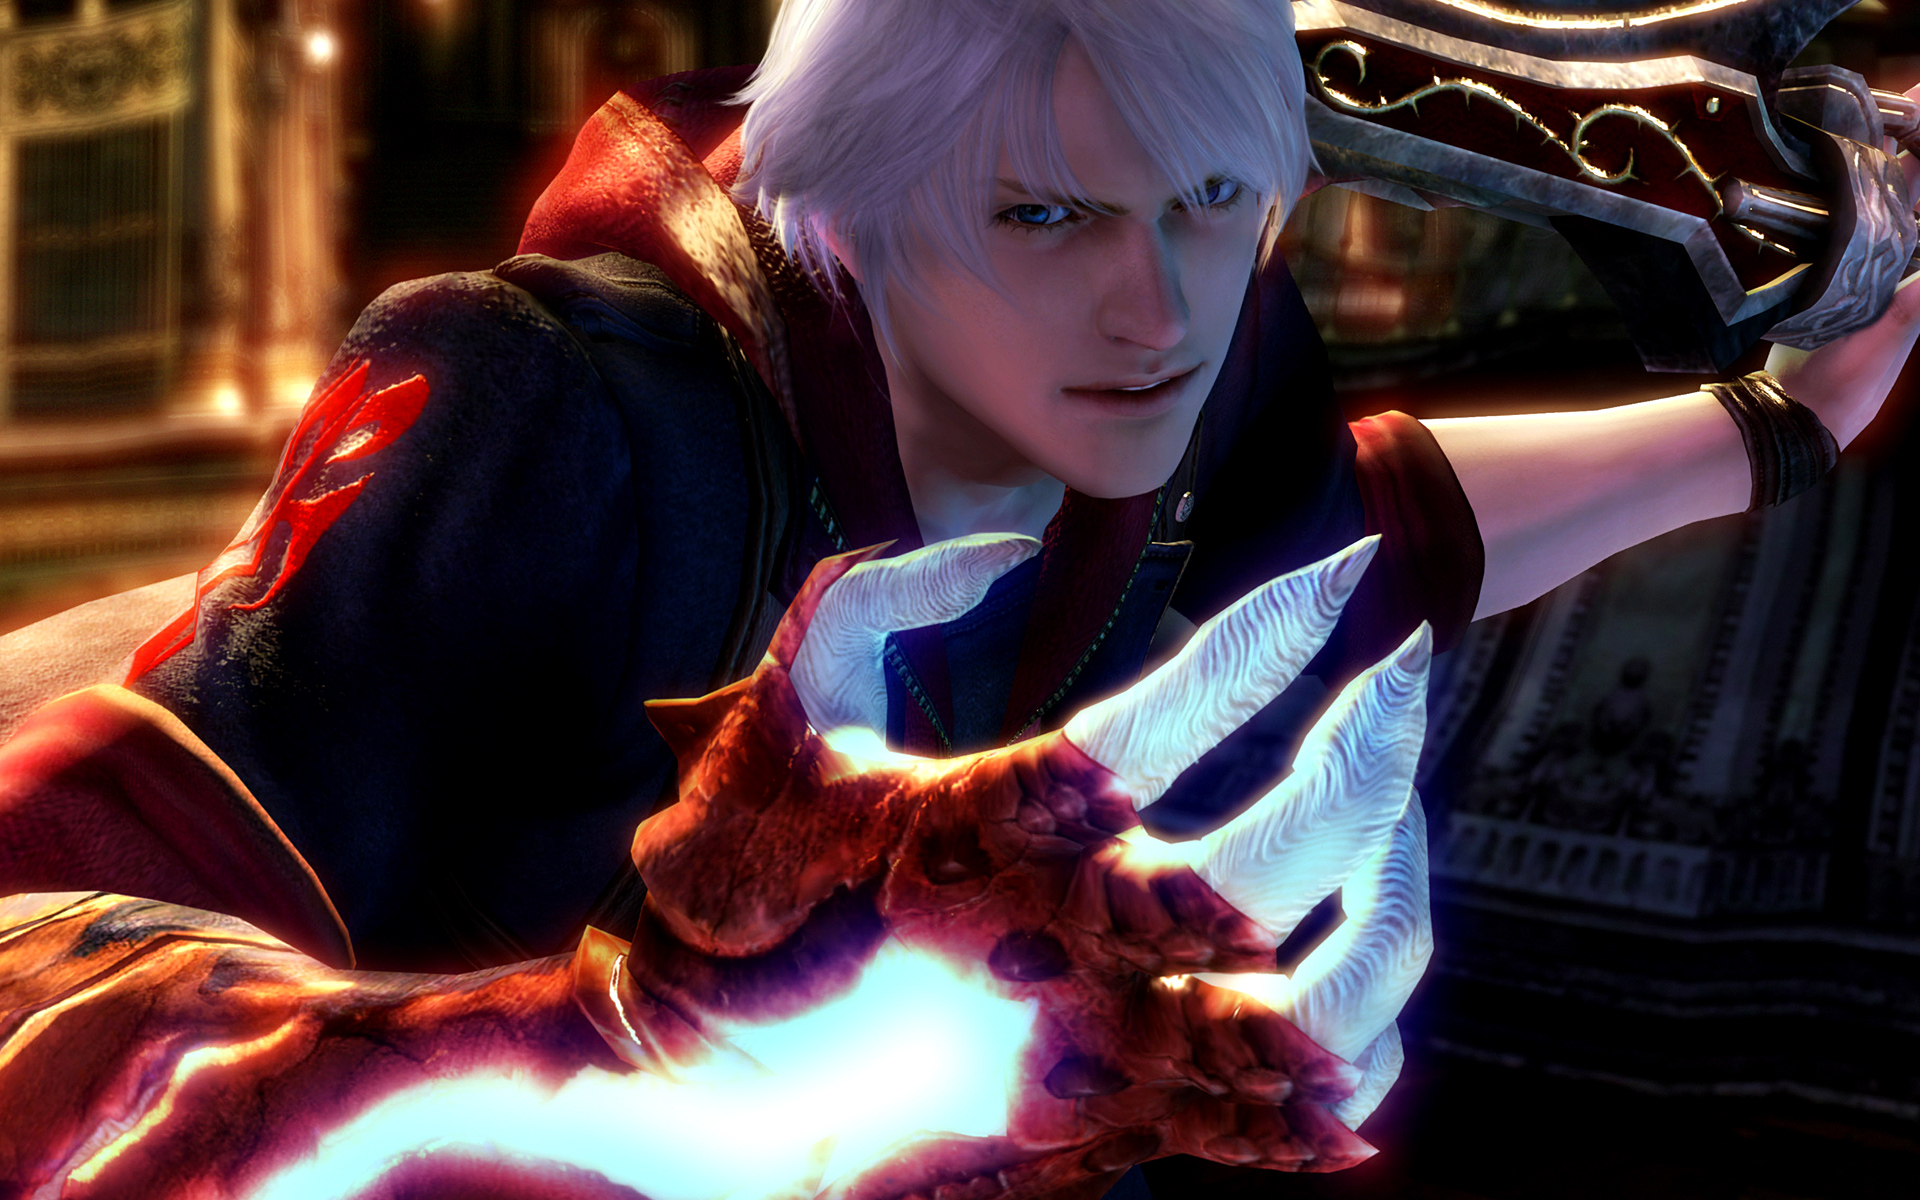 devil may cry 3 pc free full download